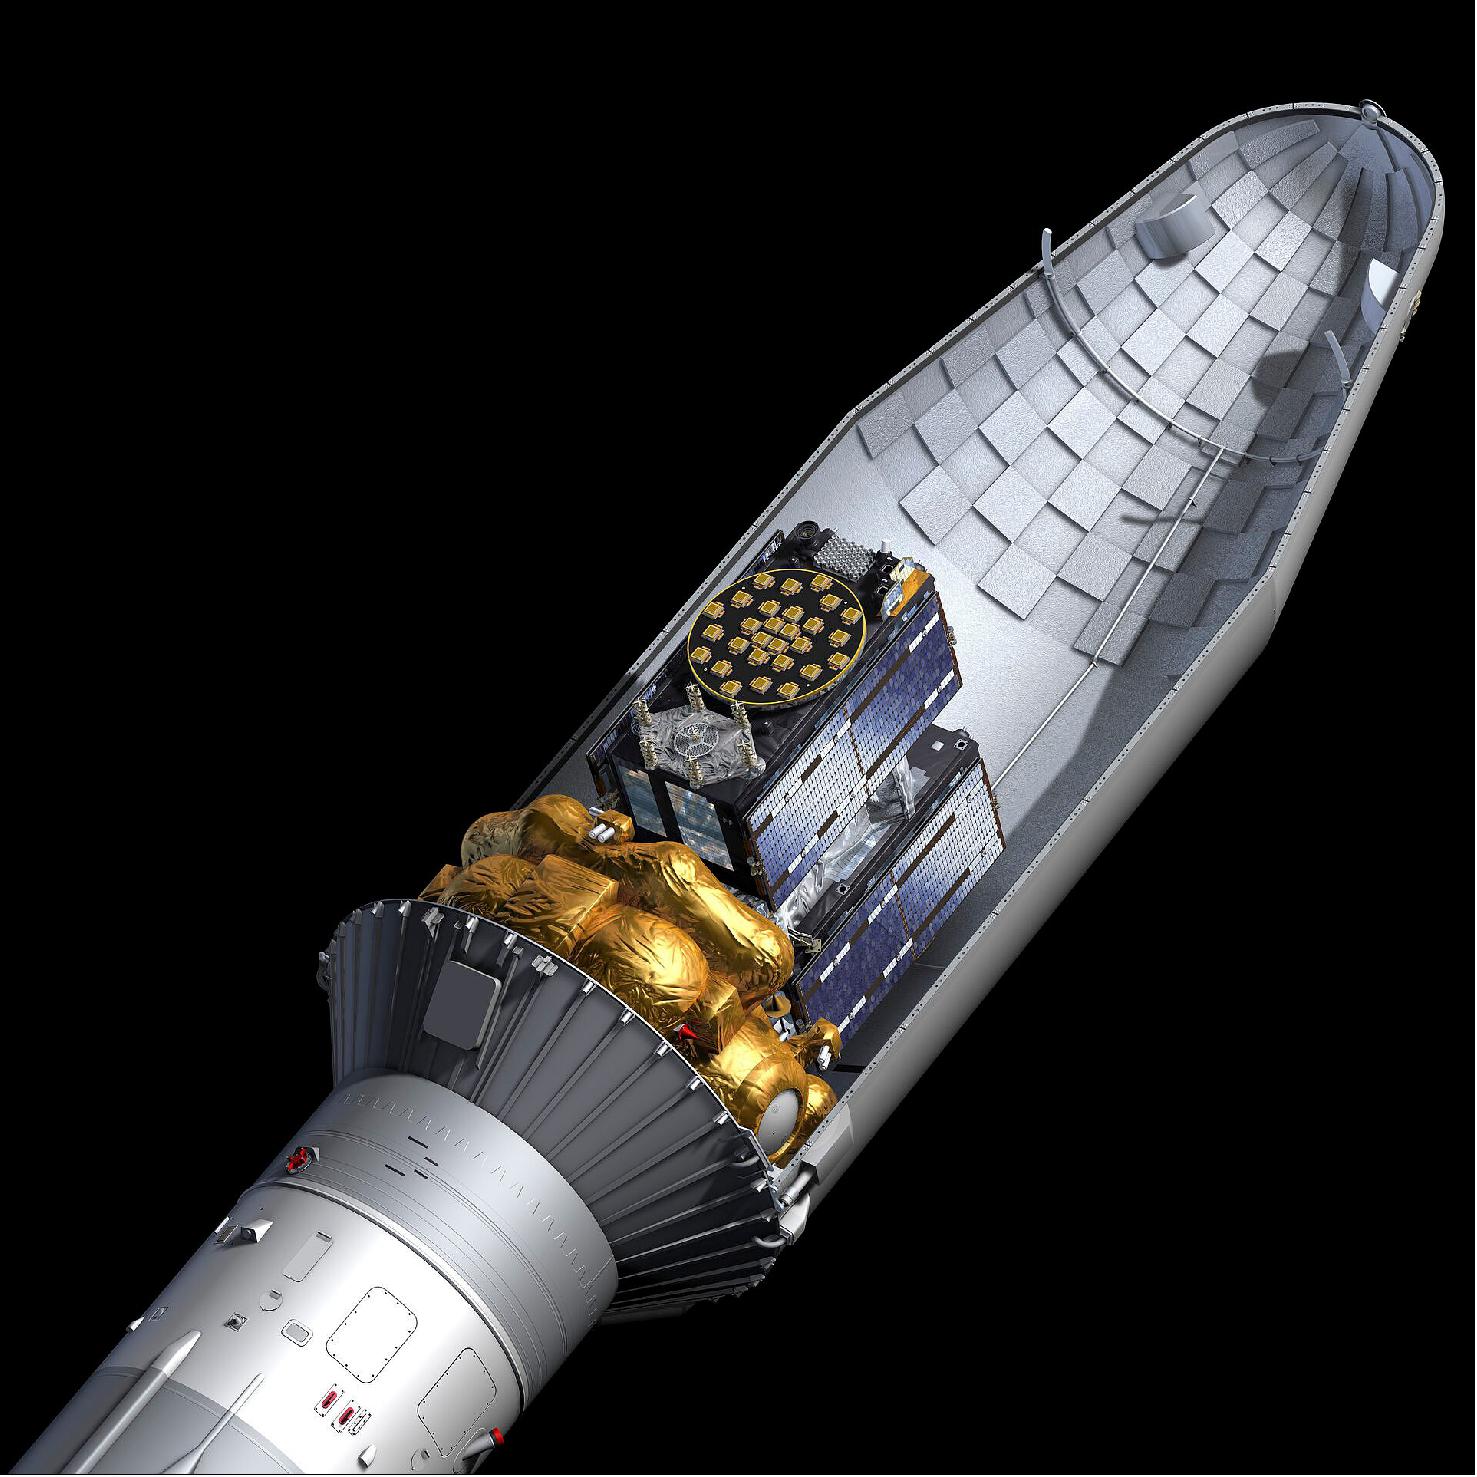 Figure 9: Galileos 27-28 seen atop their gold-wrapped Fregat upper stage within their Soyuz launcher fairing (image credit: ESA, P. Carril)